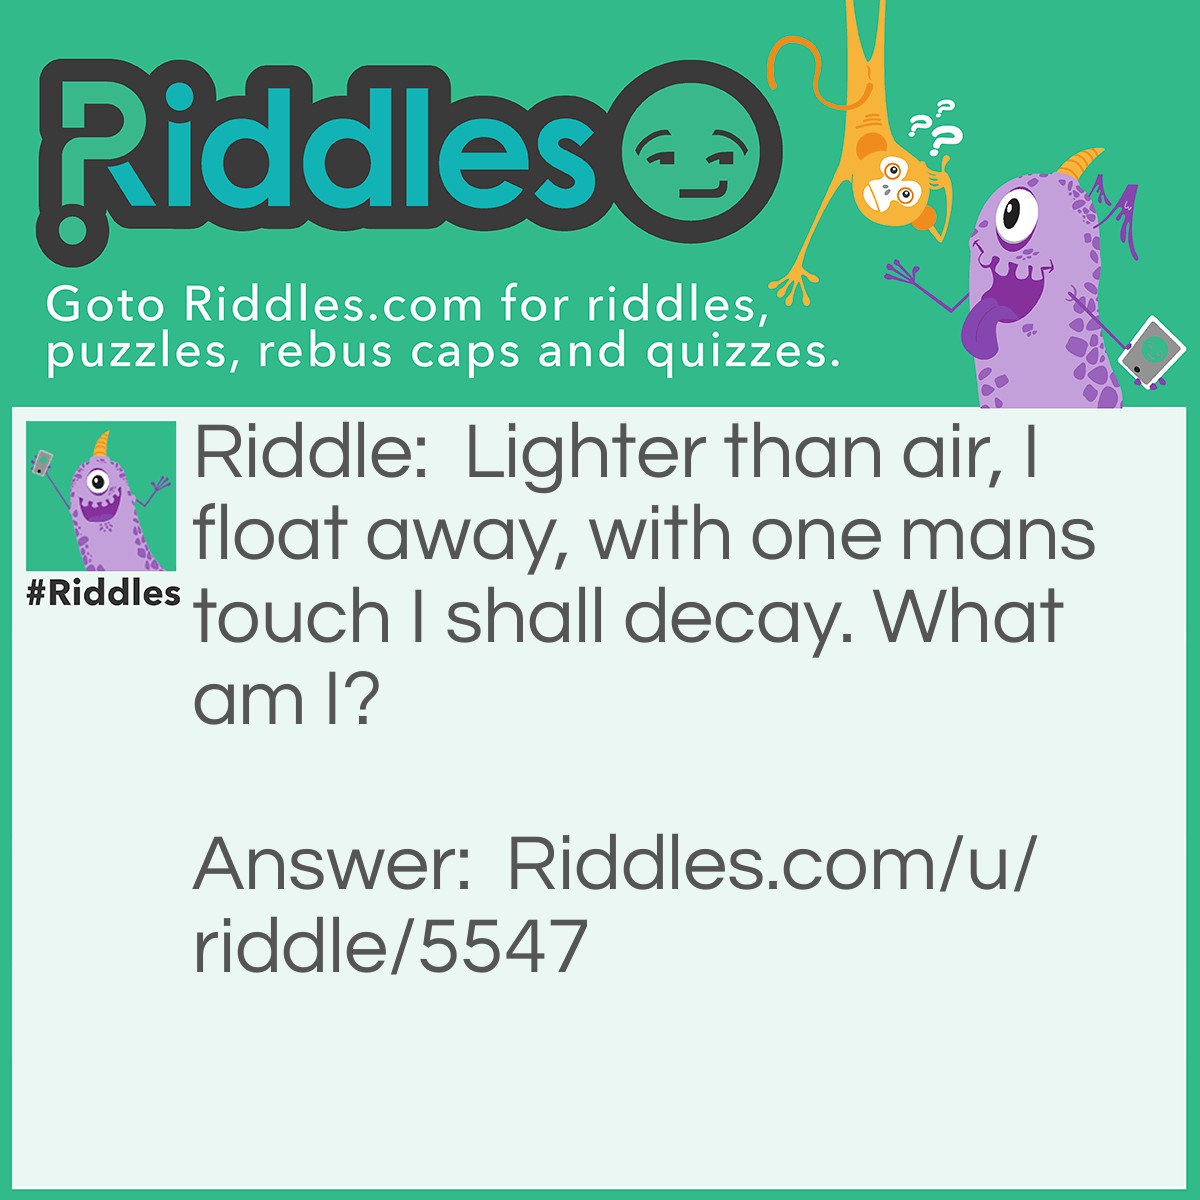 Riddle: Lighter than air, I float away, with one mans touch I shall decay. What am I? Answer: Bubble.